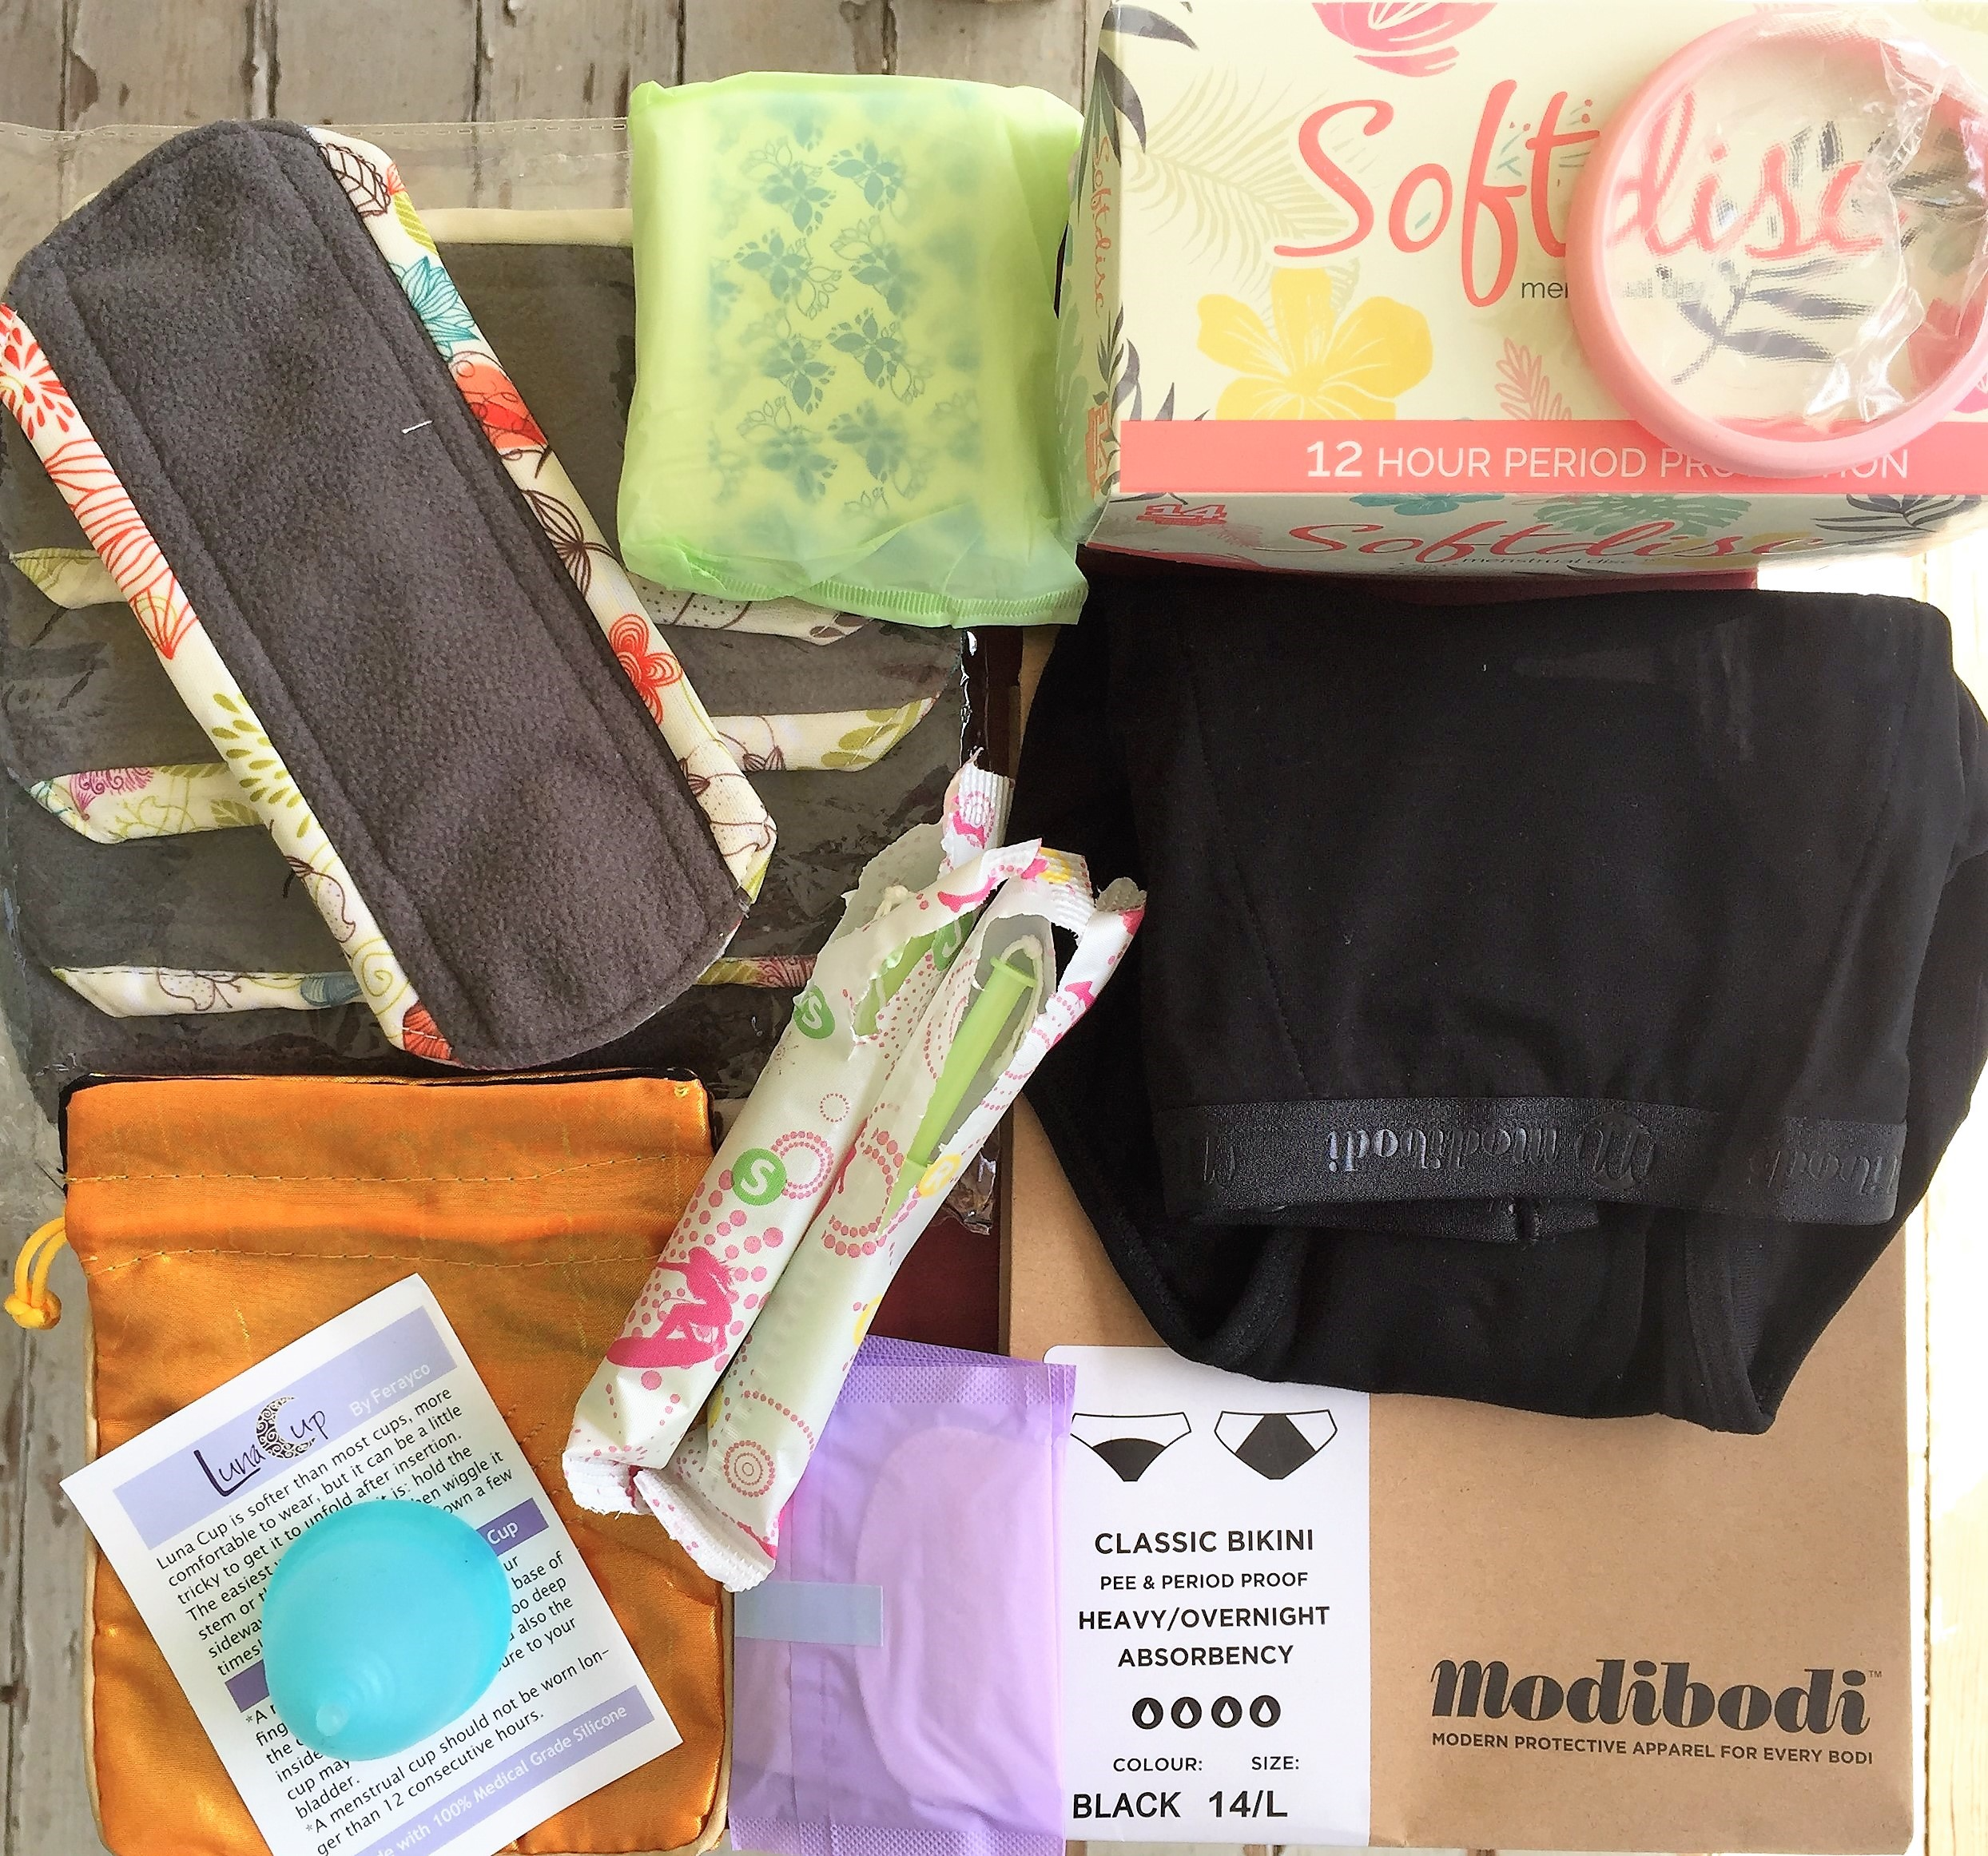 menstrual health supplies: a cloth pad, a pad, a soft cup, panties, a pantyliner, tampons, a menstrual cup